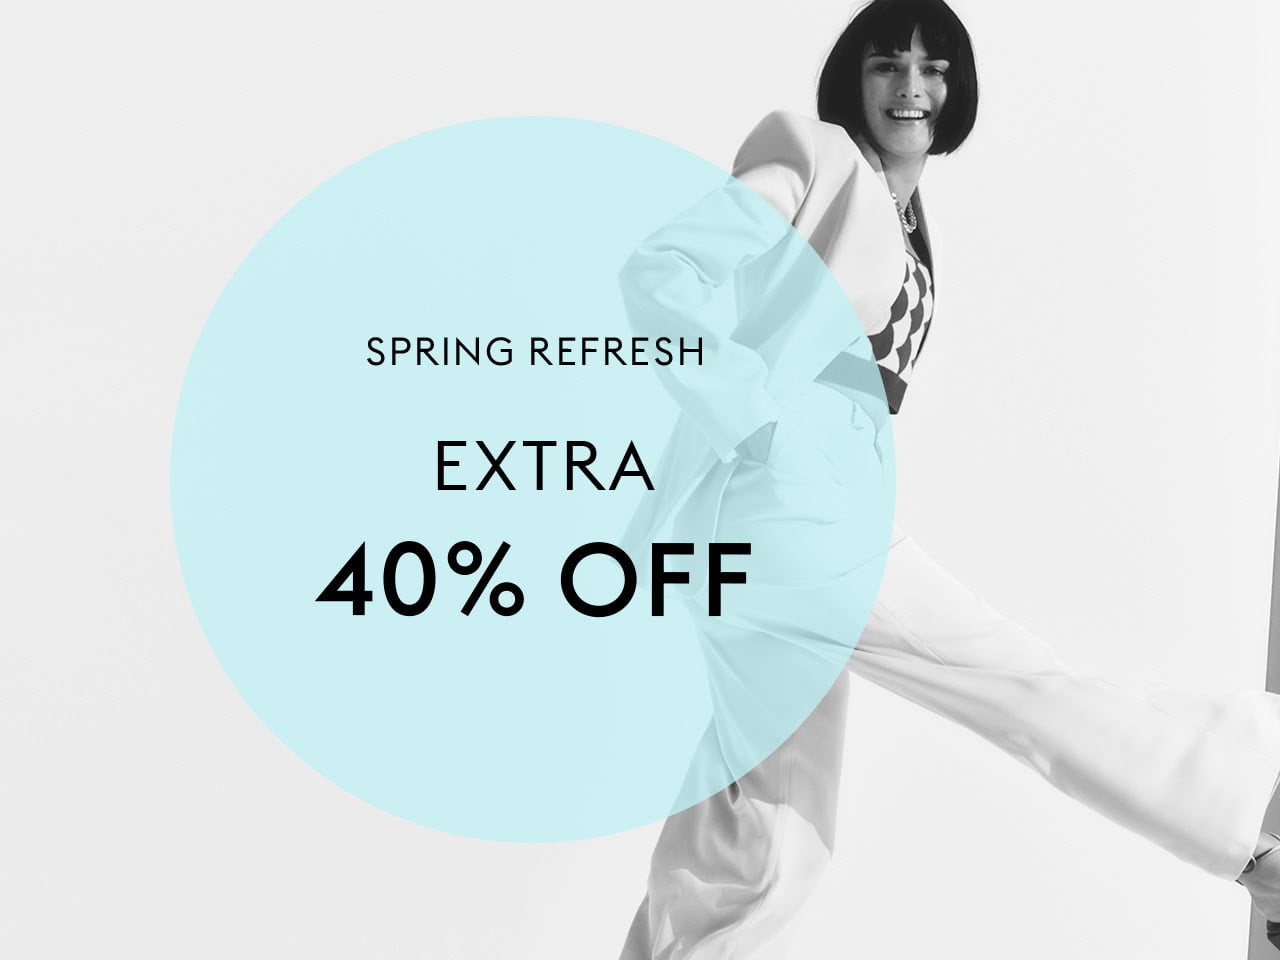 Extra 40% off selected items at The Outnet